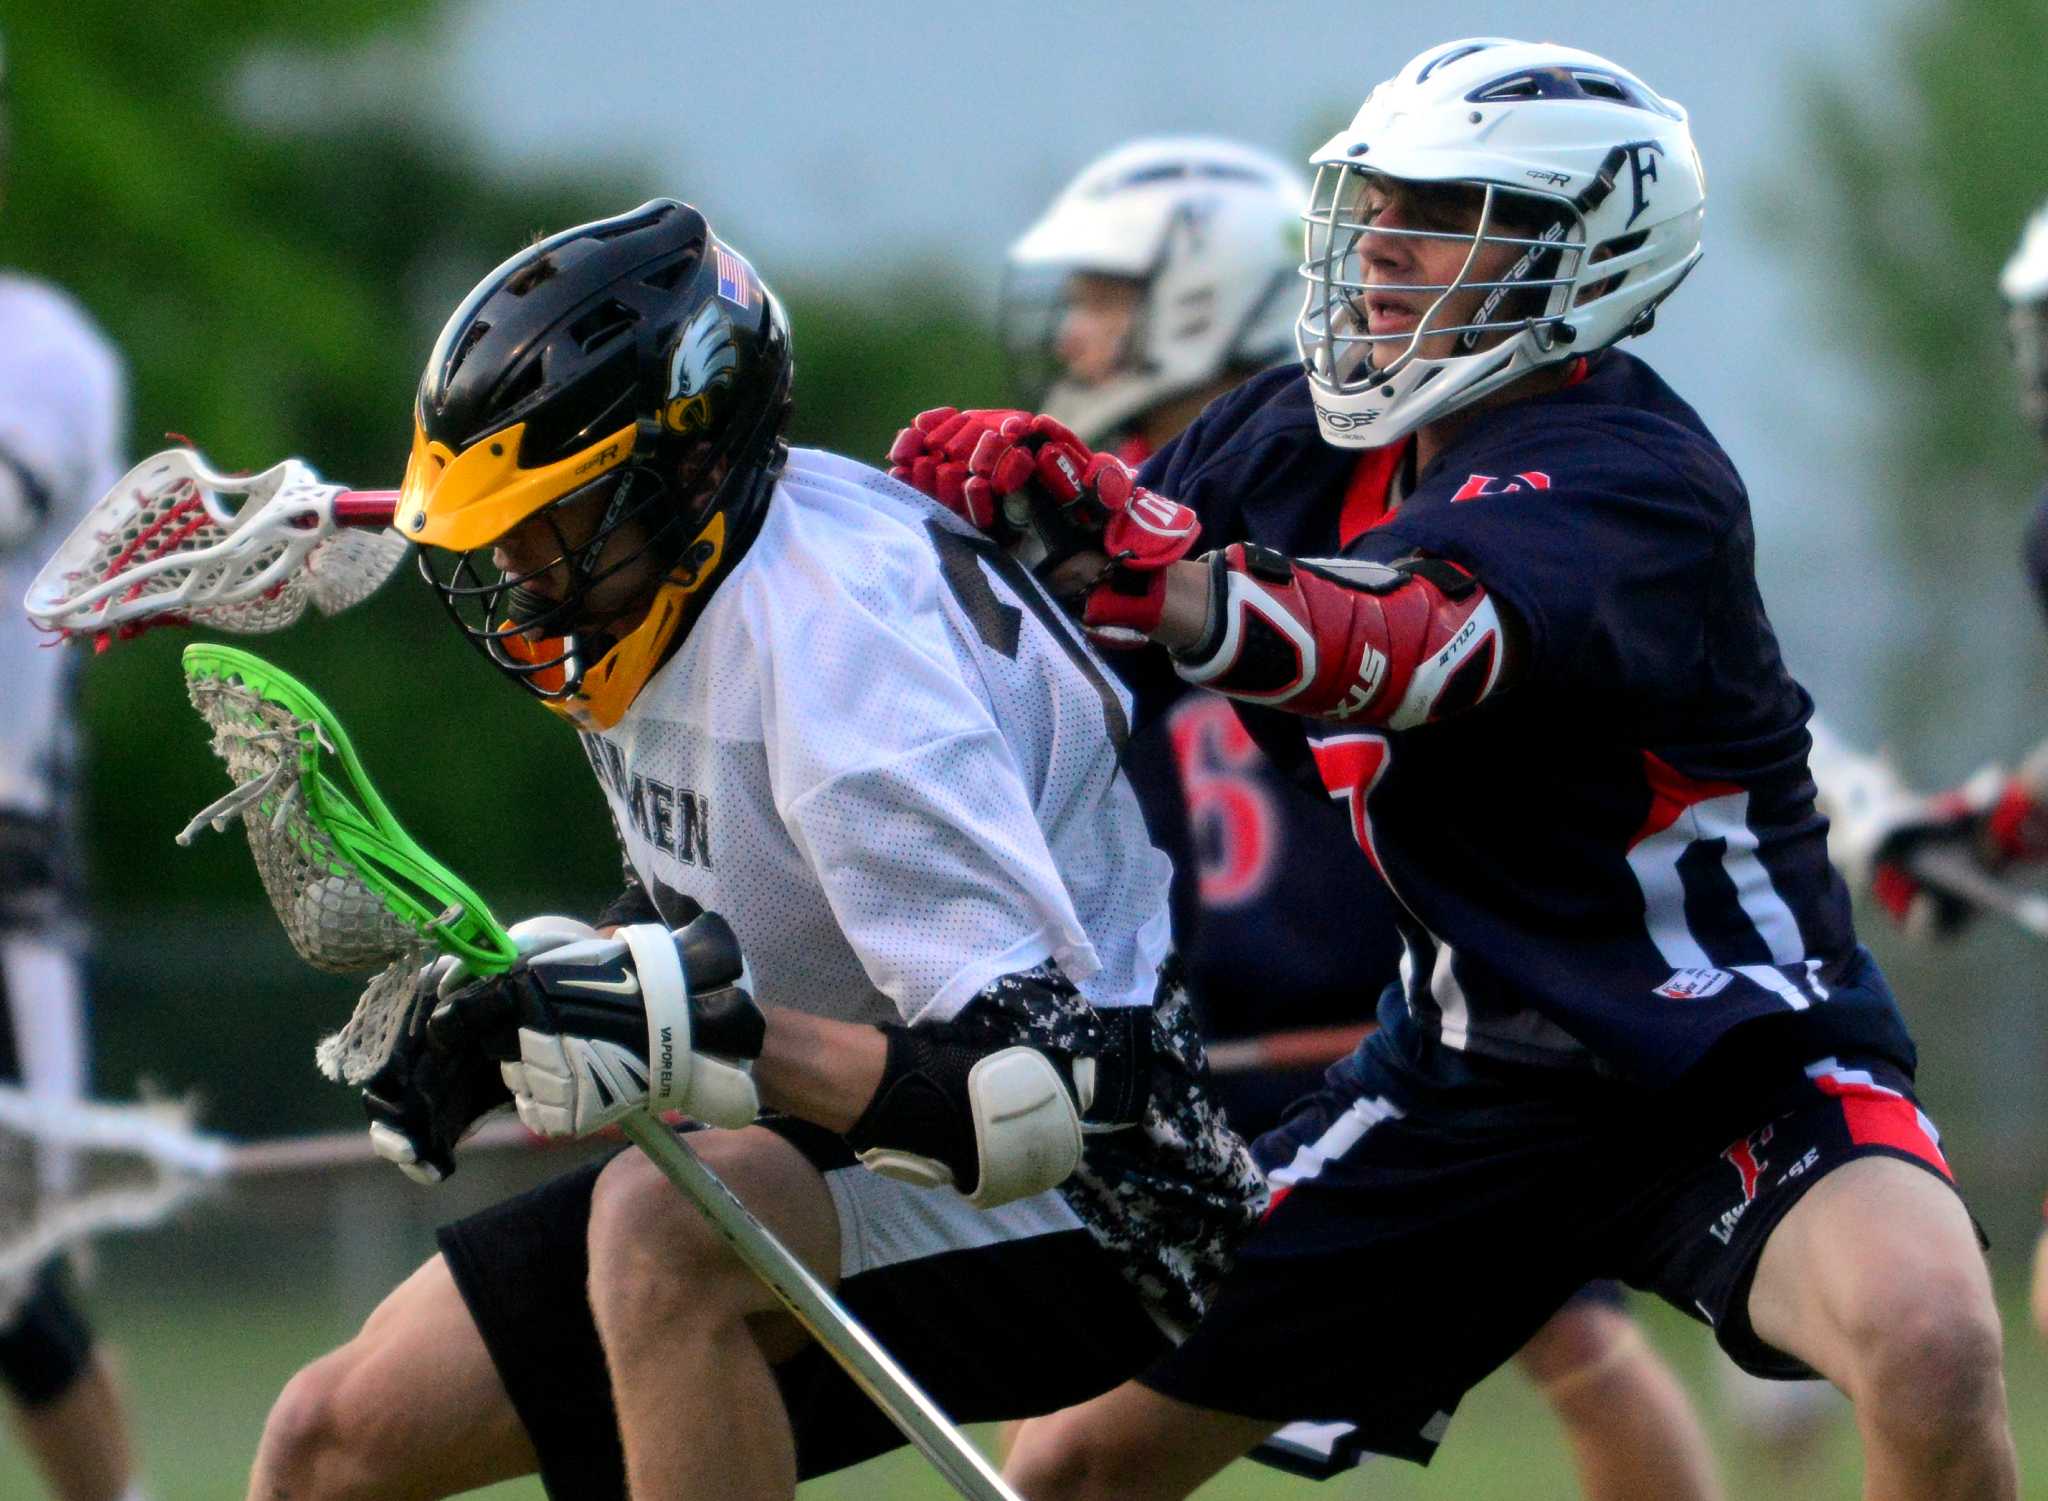 Friday's high school roundup: Foran tops rival Law in boys lacrosse